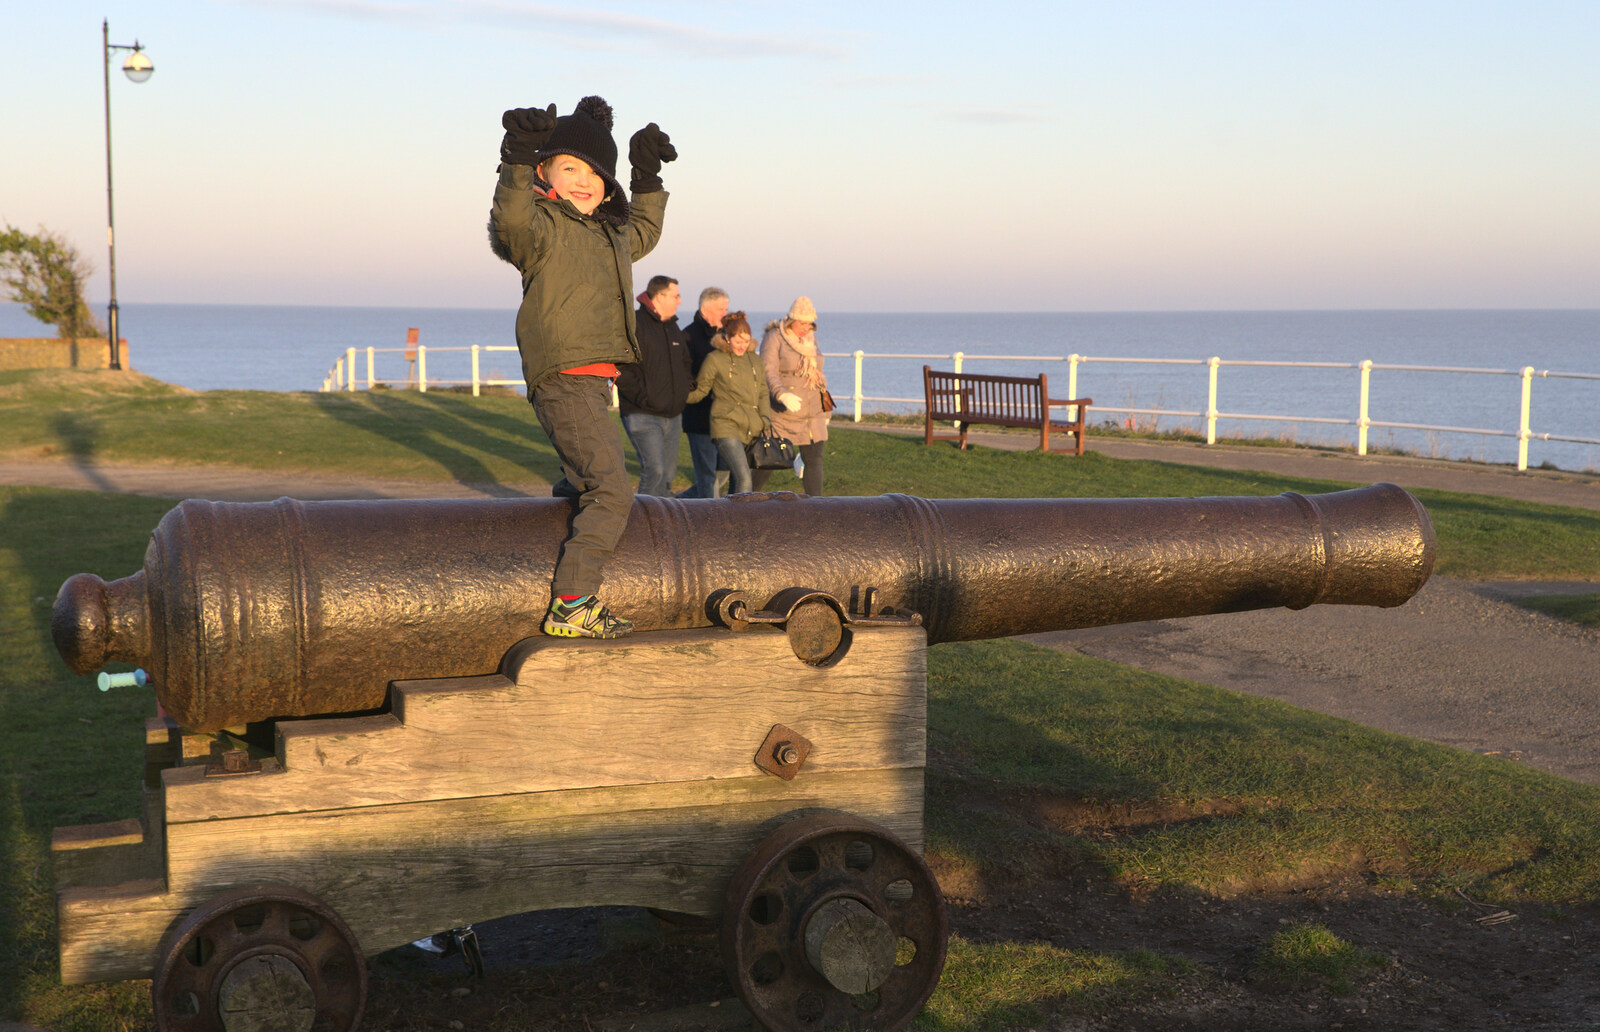 Fred perches on top of a cannon from Sunset on the Beach, Southwold, Suffolk - 30th December 2014